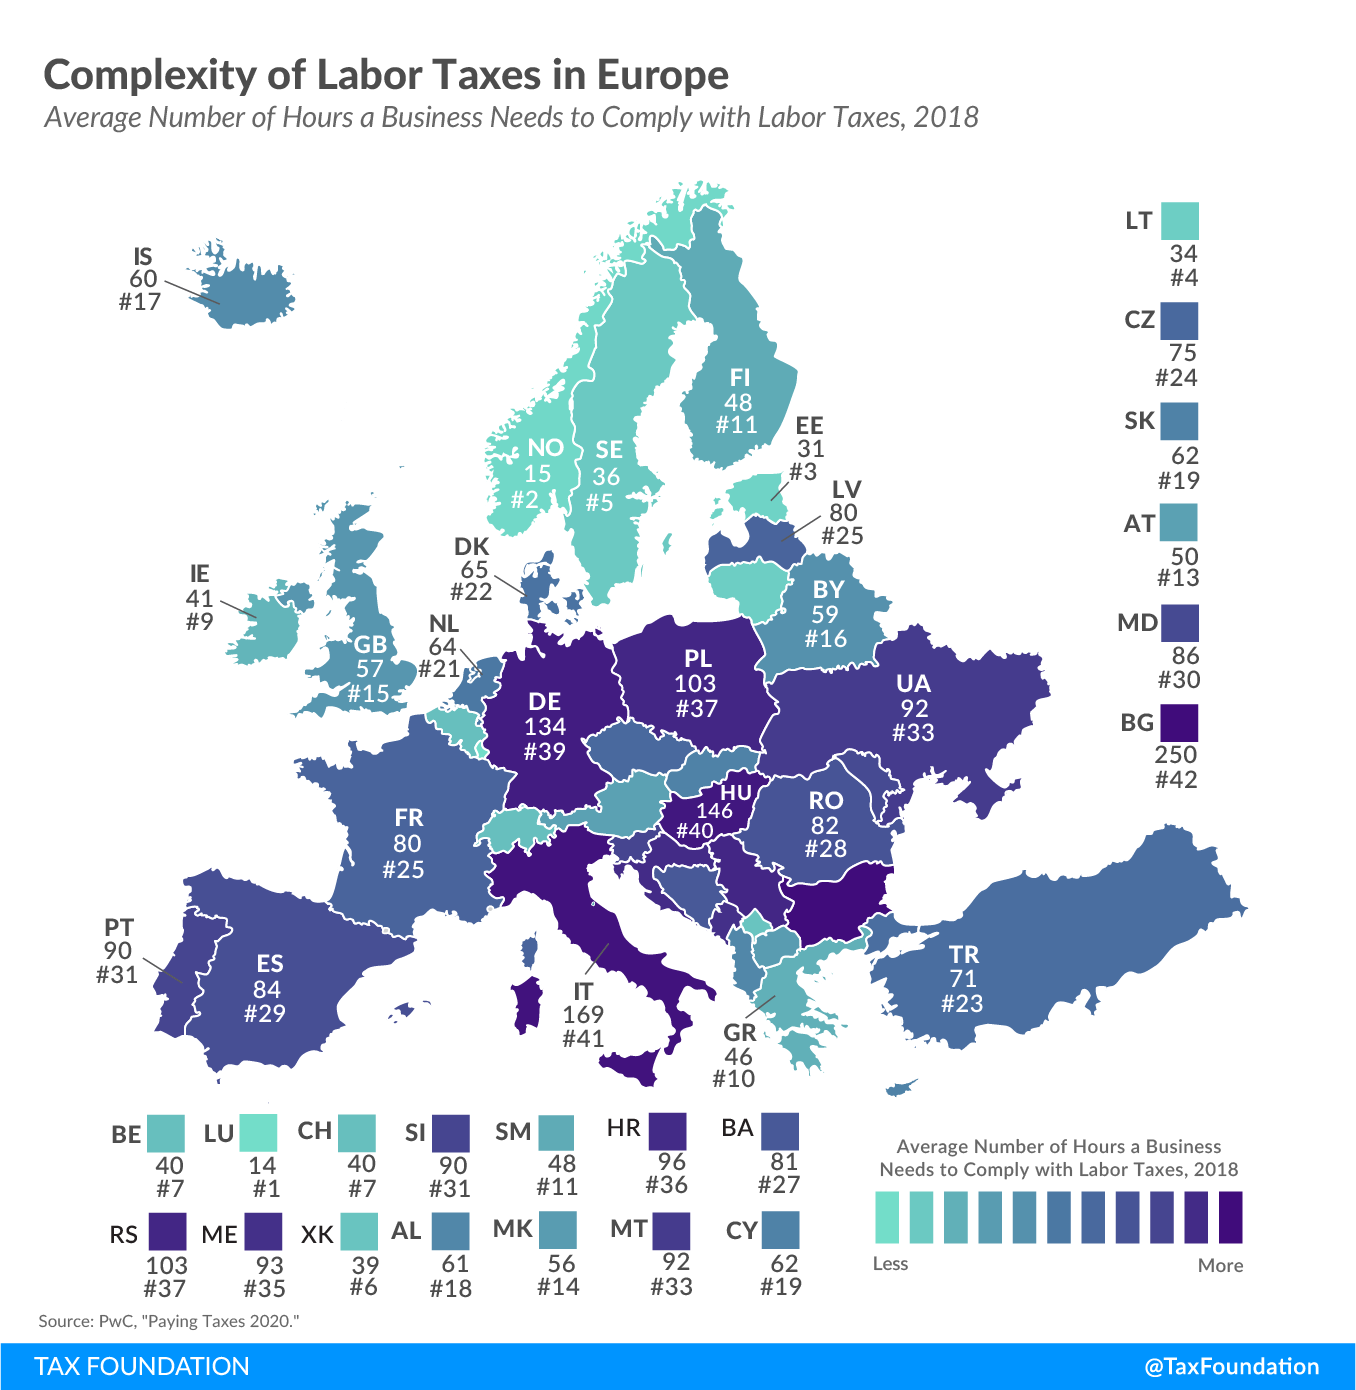 Complexity of labor taxes in Europe, labor tax administrative burden in Europe, 2020 tax compliance rules